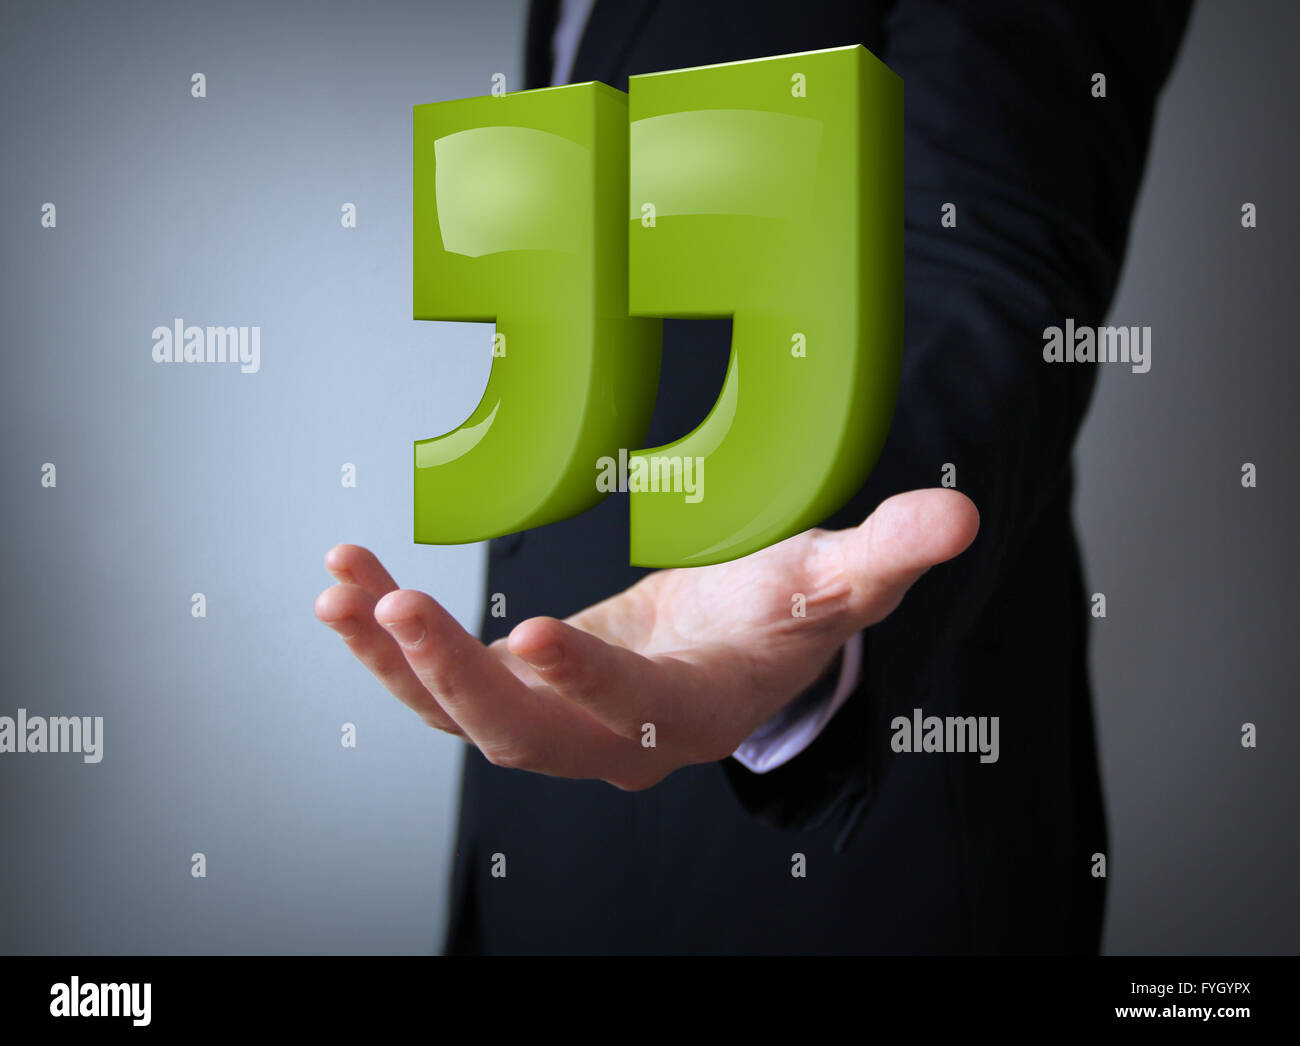 green reflective quotes over businessman hand Stock Photo